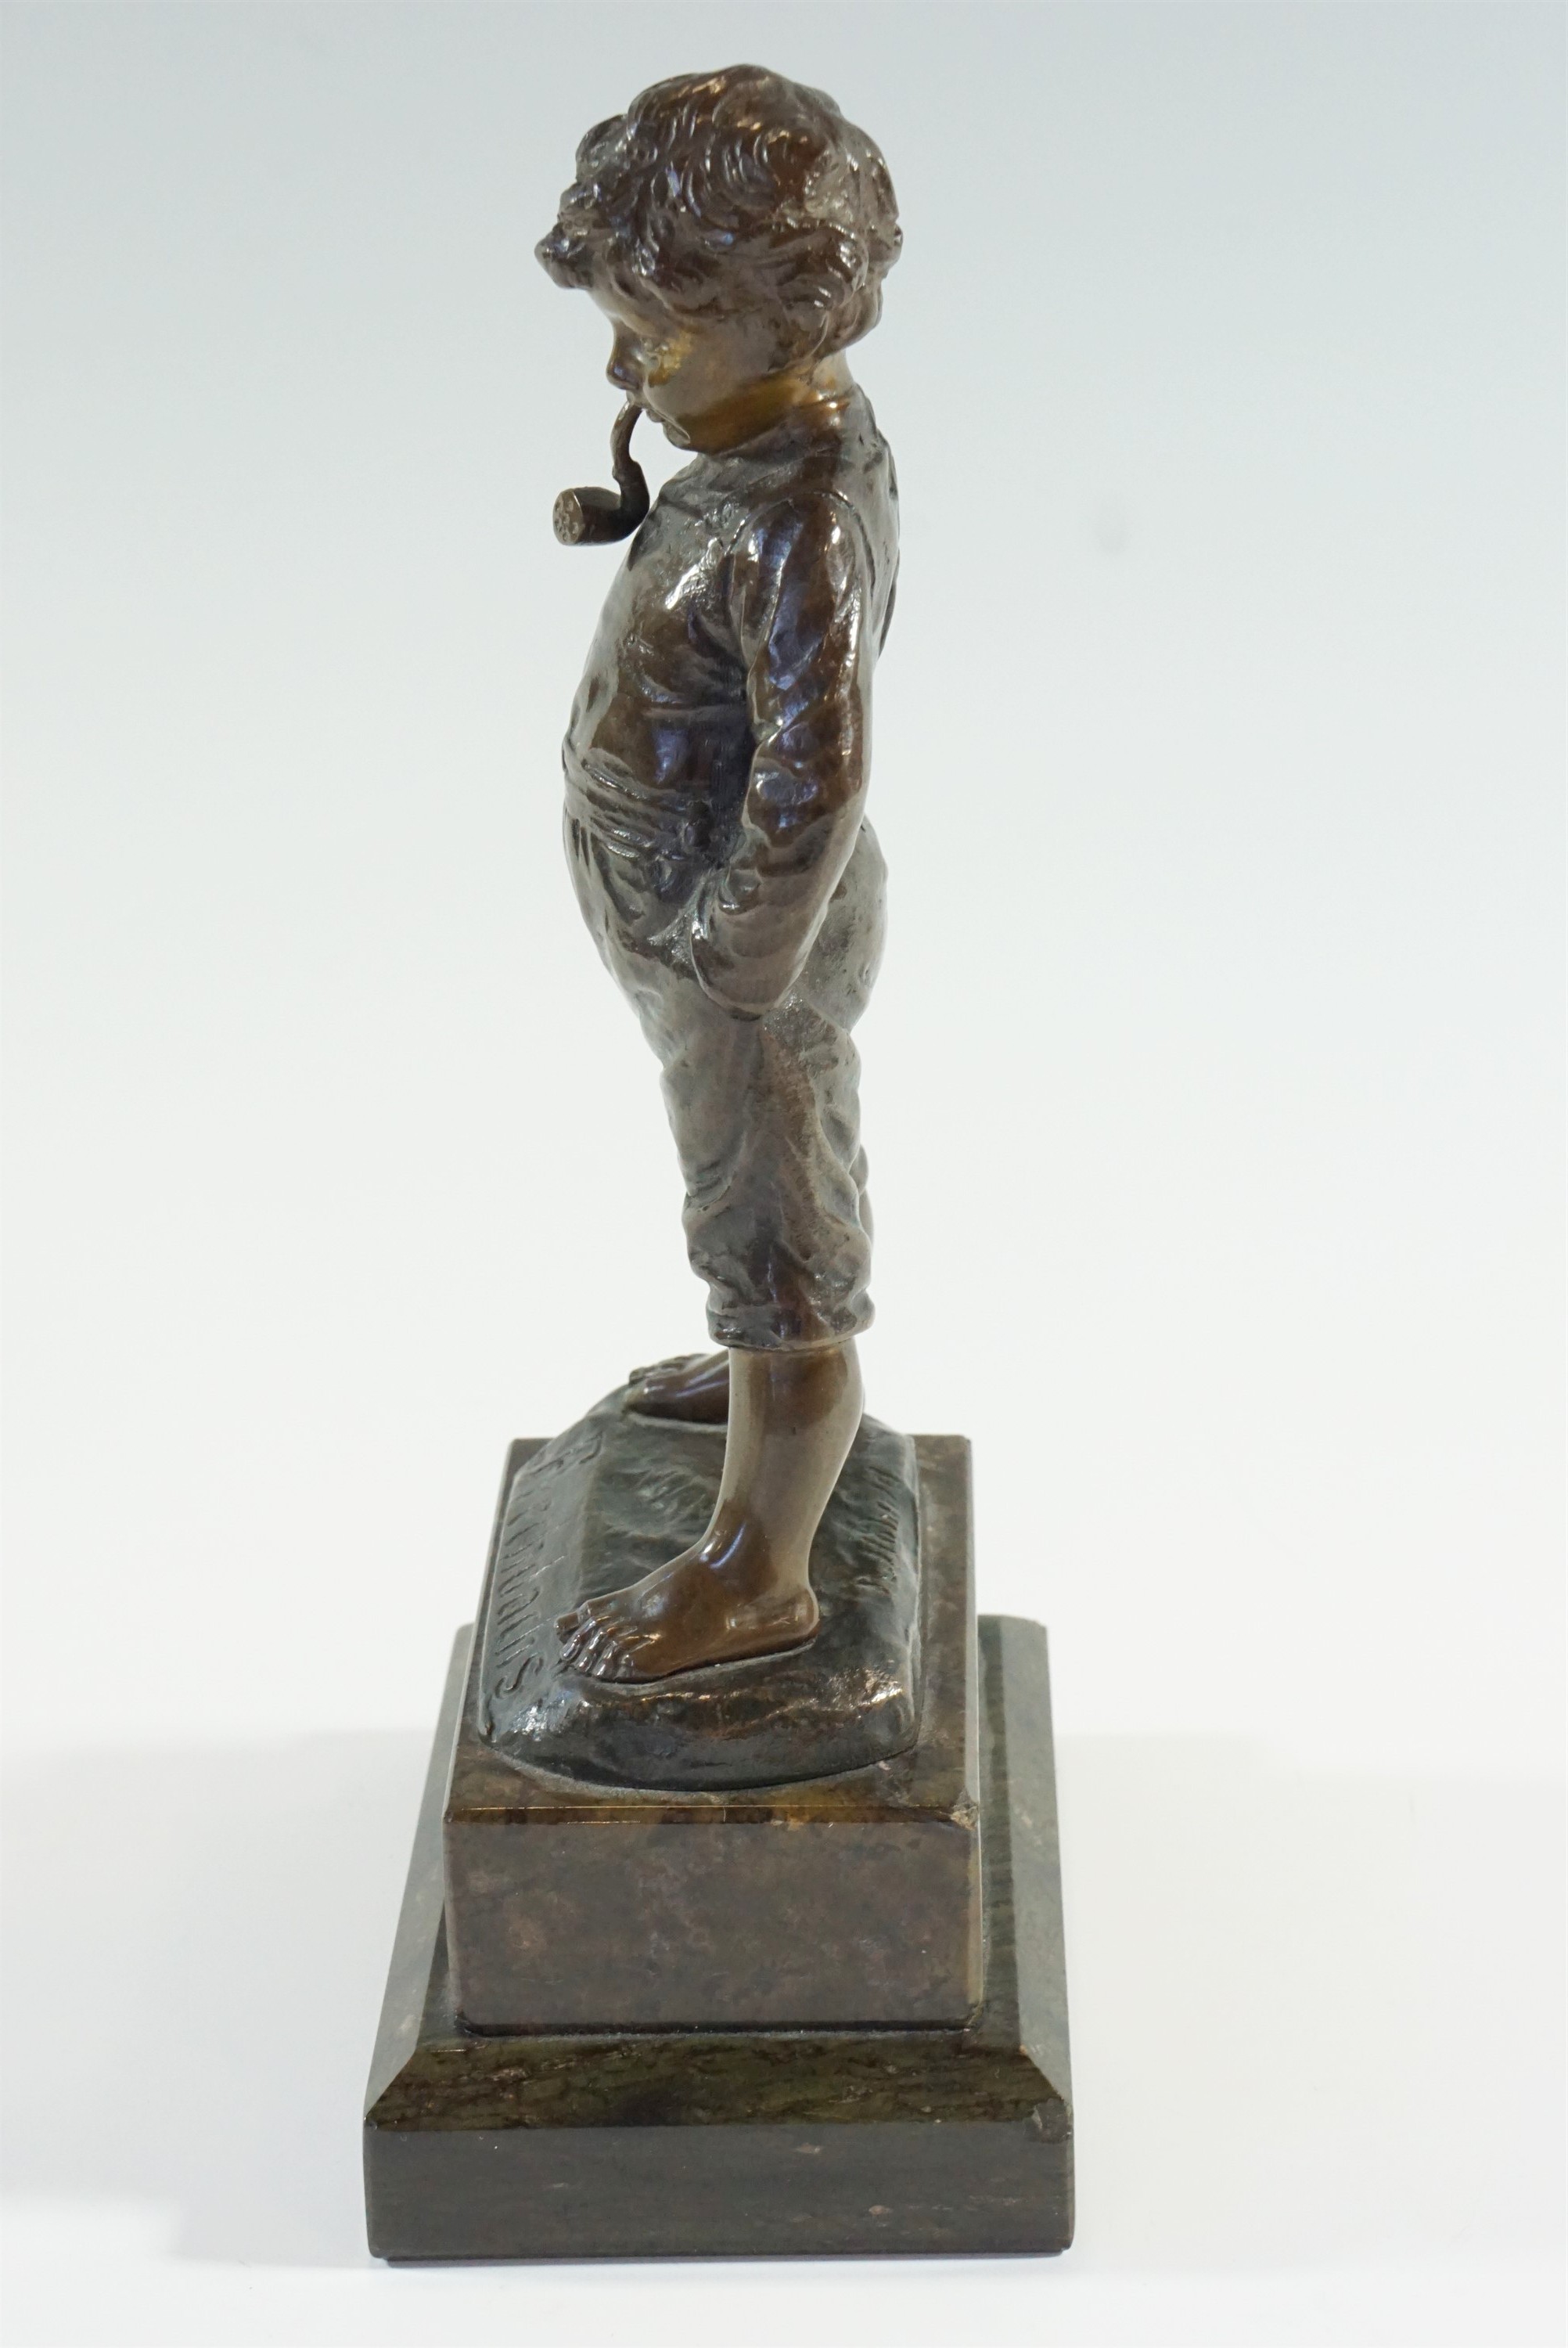 After R Hobold (German, 19th Century) "Frechdachs", [cheeky monkey], a cast bronze figure of a young - Image 4 of 5